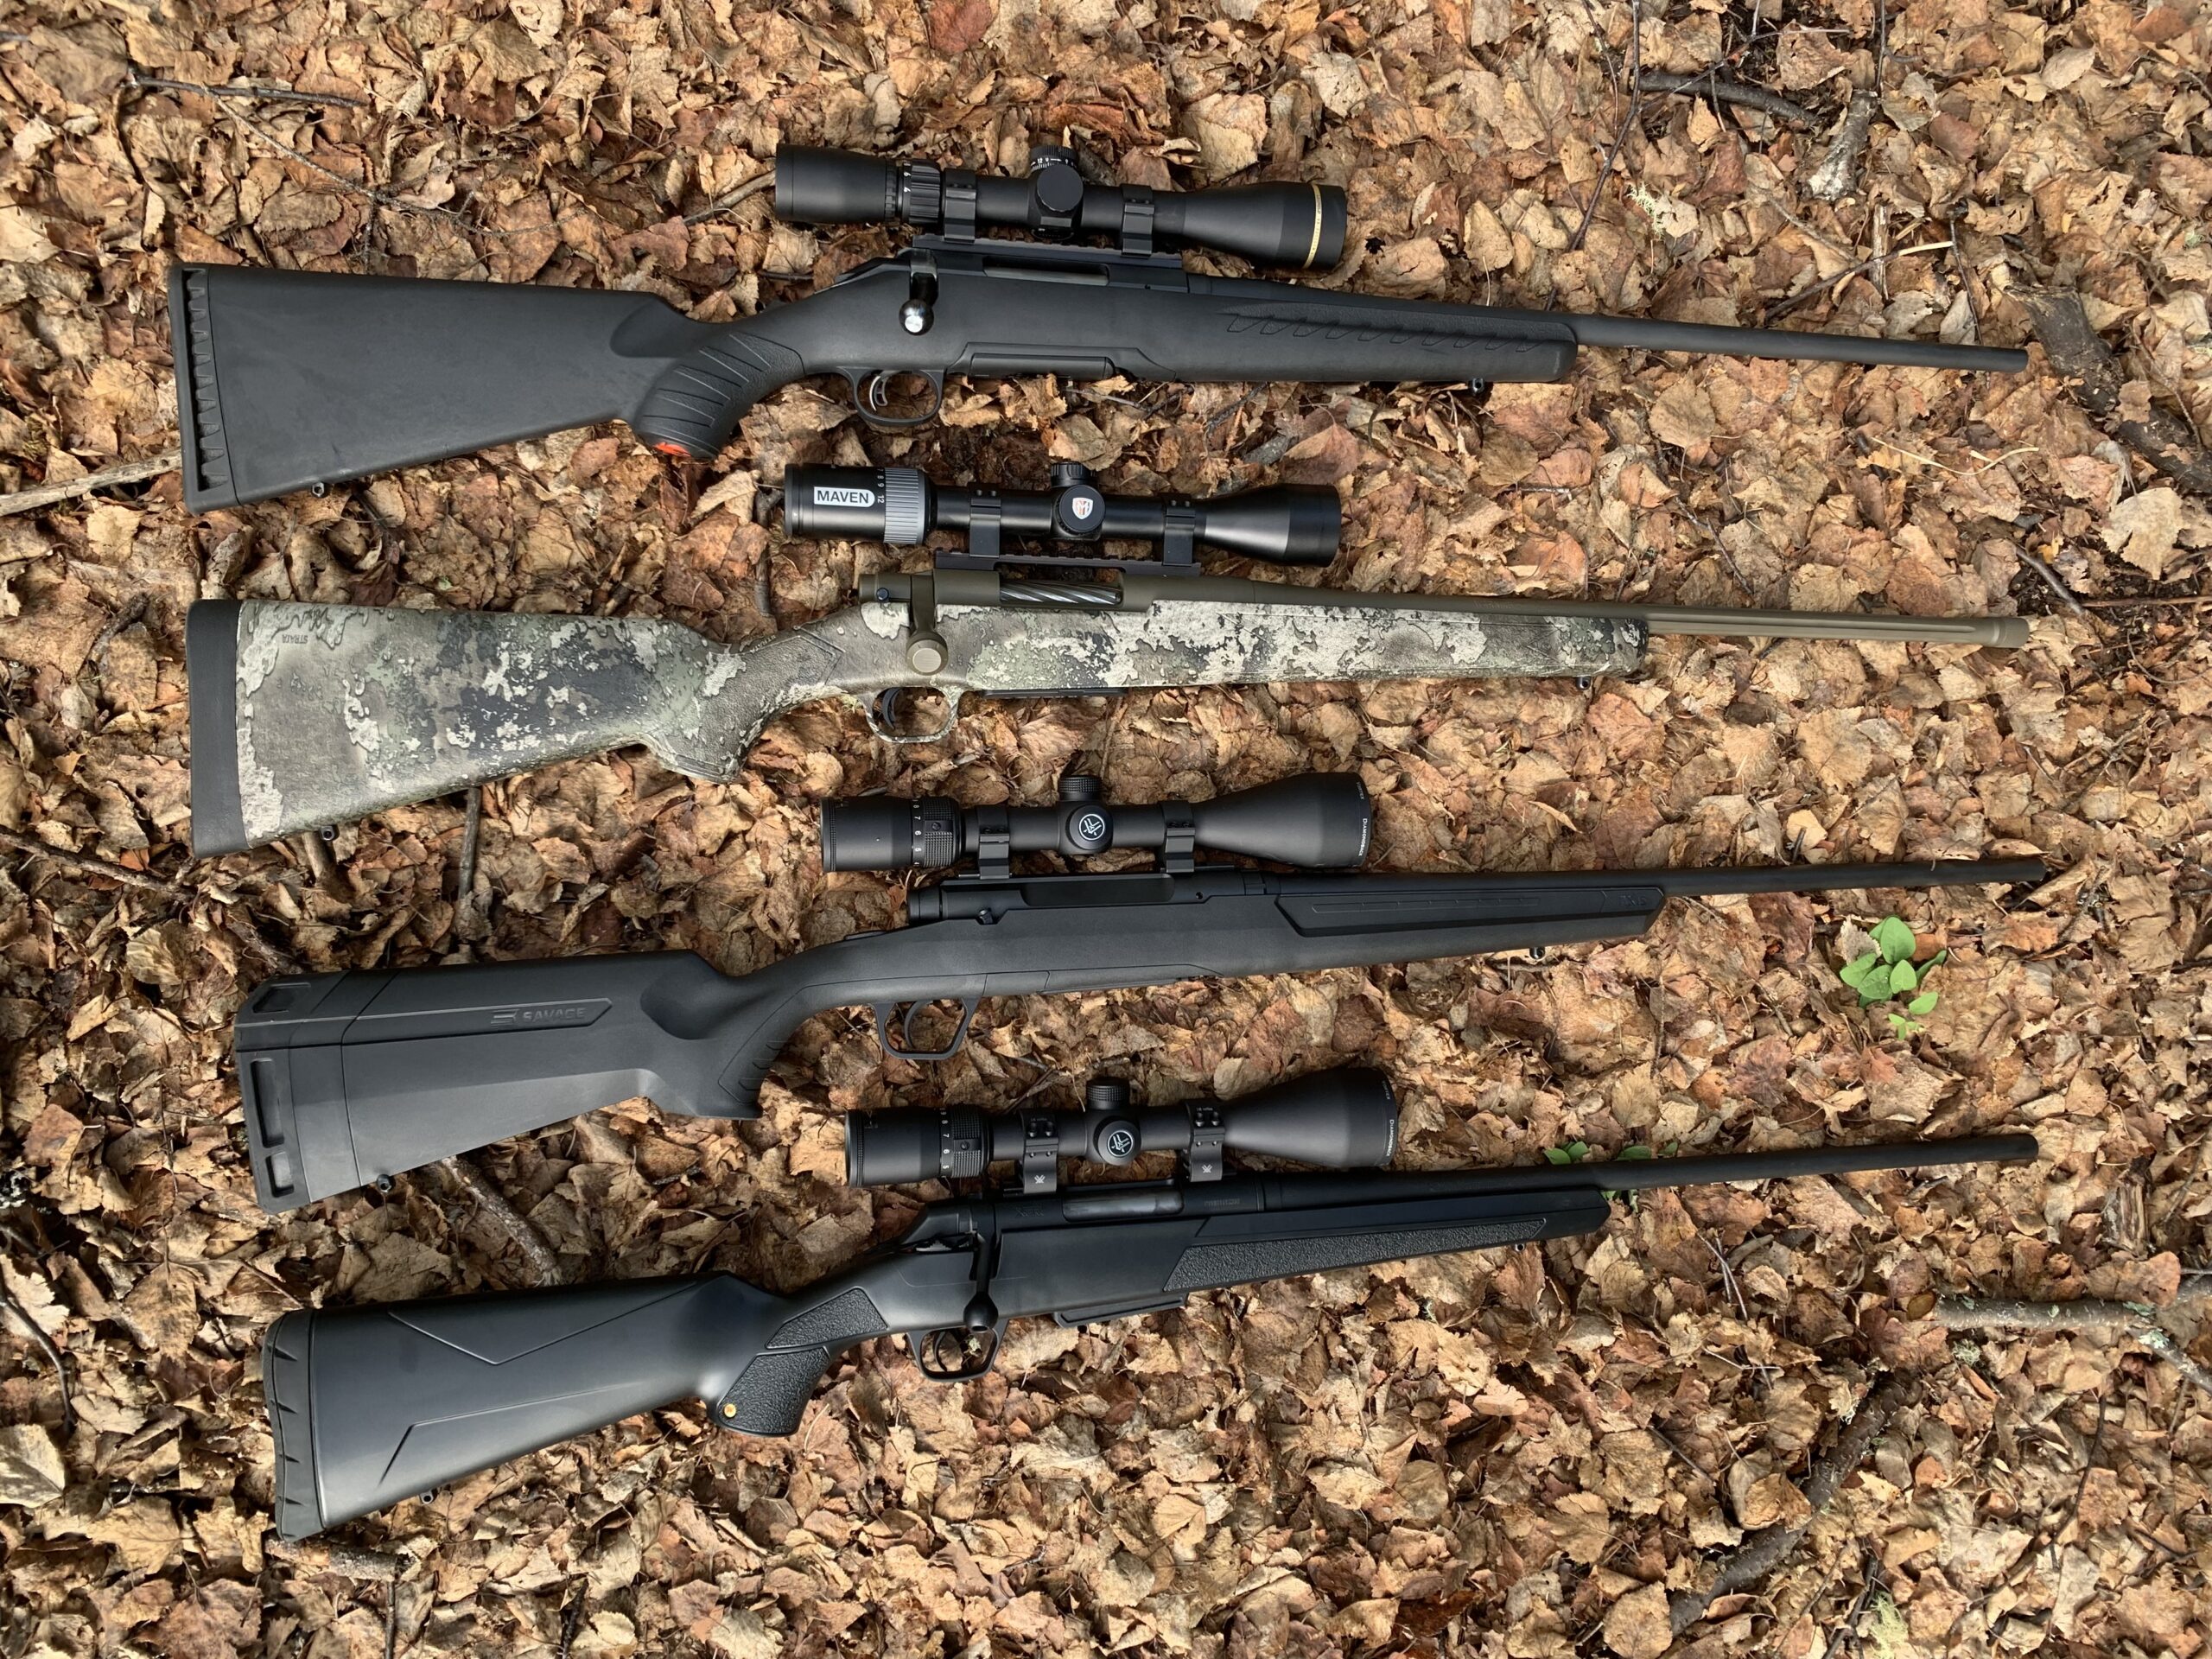 Hunting Rifles: Types and Brands